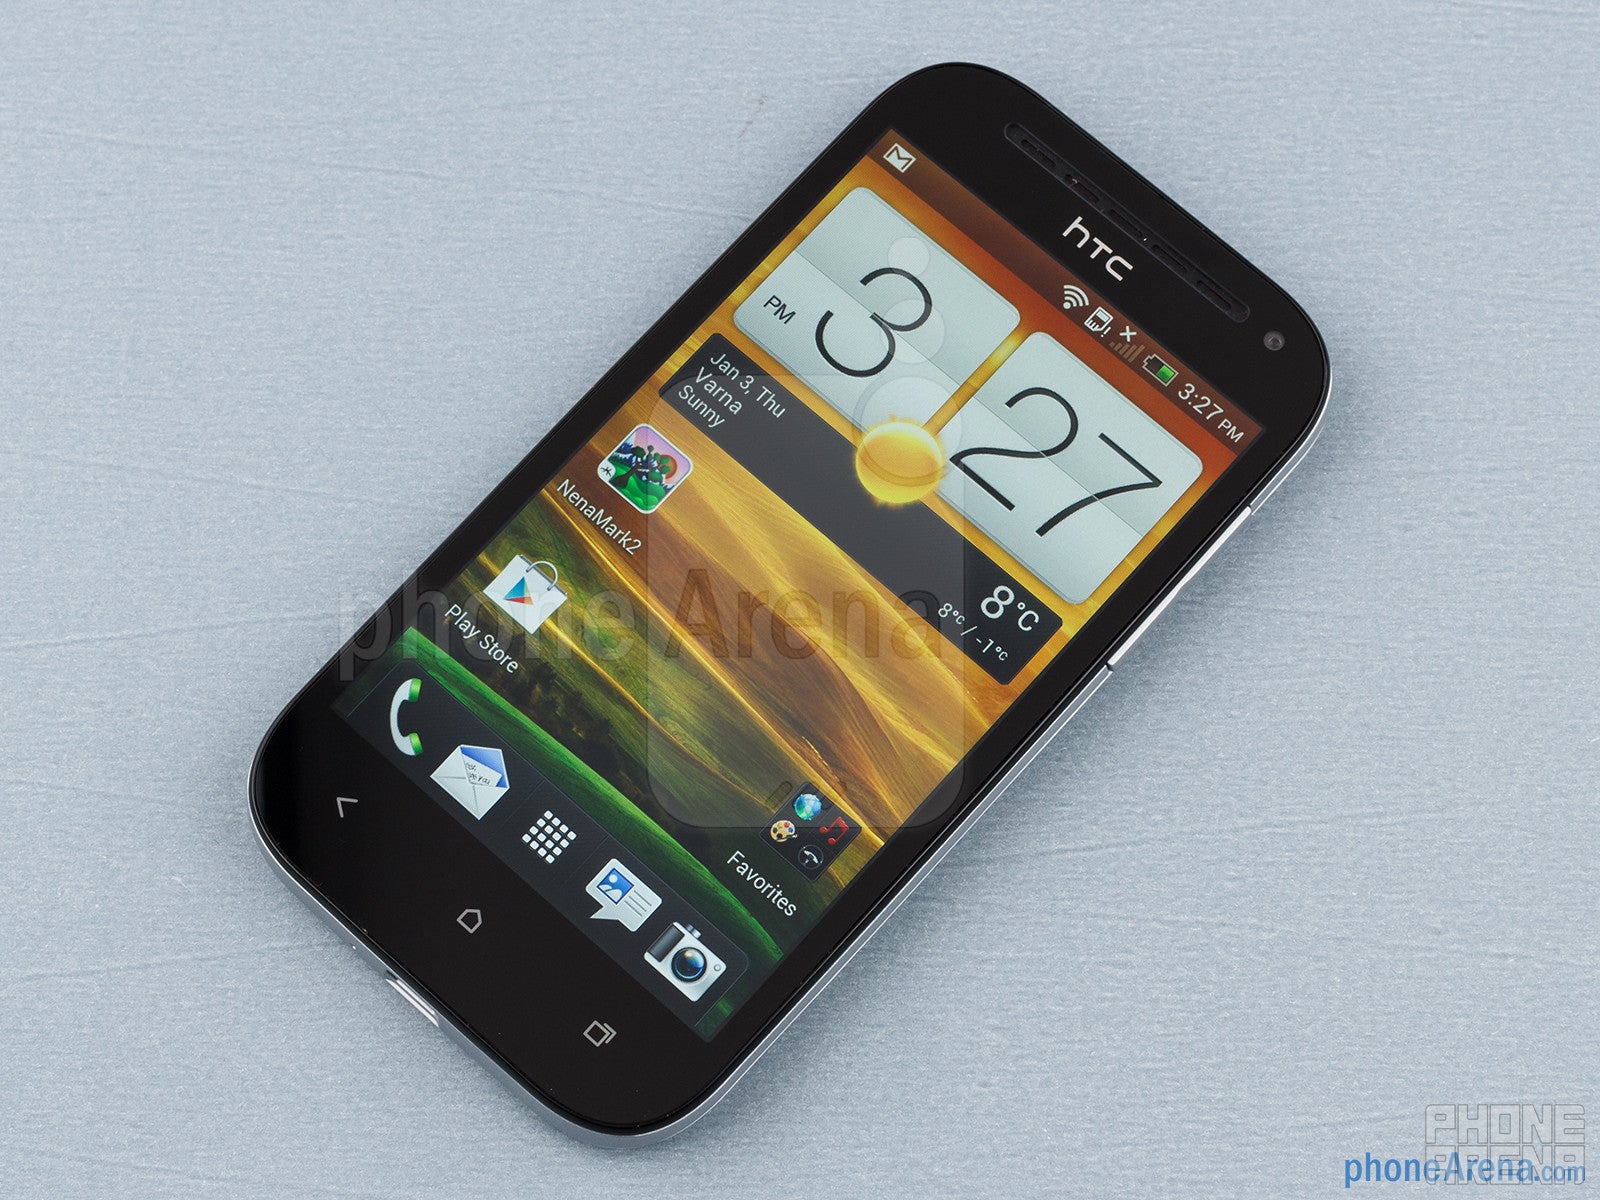 HTC One SV Review